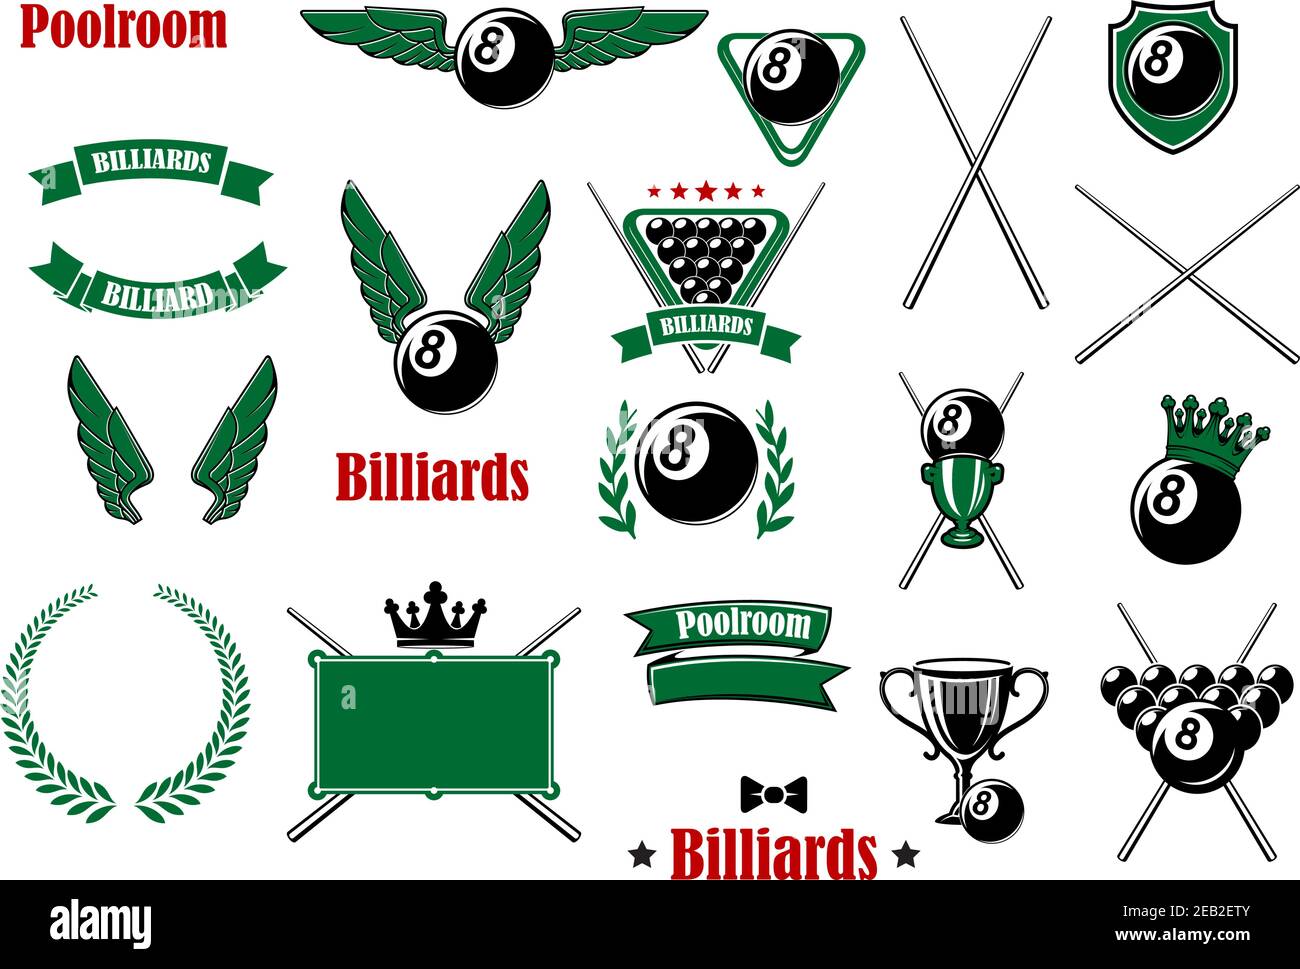 Billiards, pool and snooker game items with balls, cues, triangle table, trophies, shield crowns wings, wreath ribbon banners and headers Stock Vector